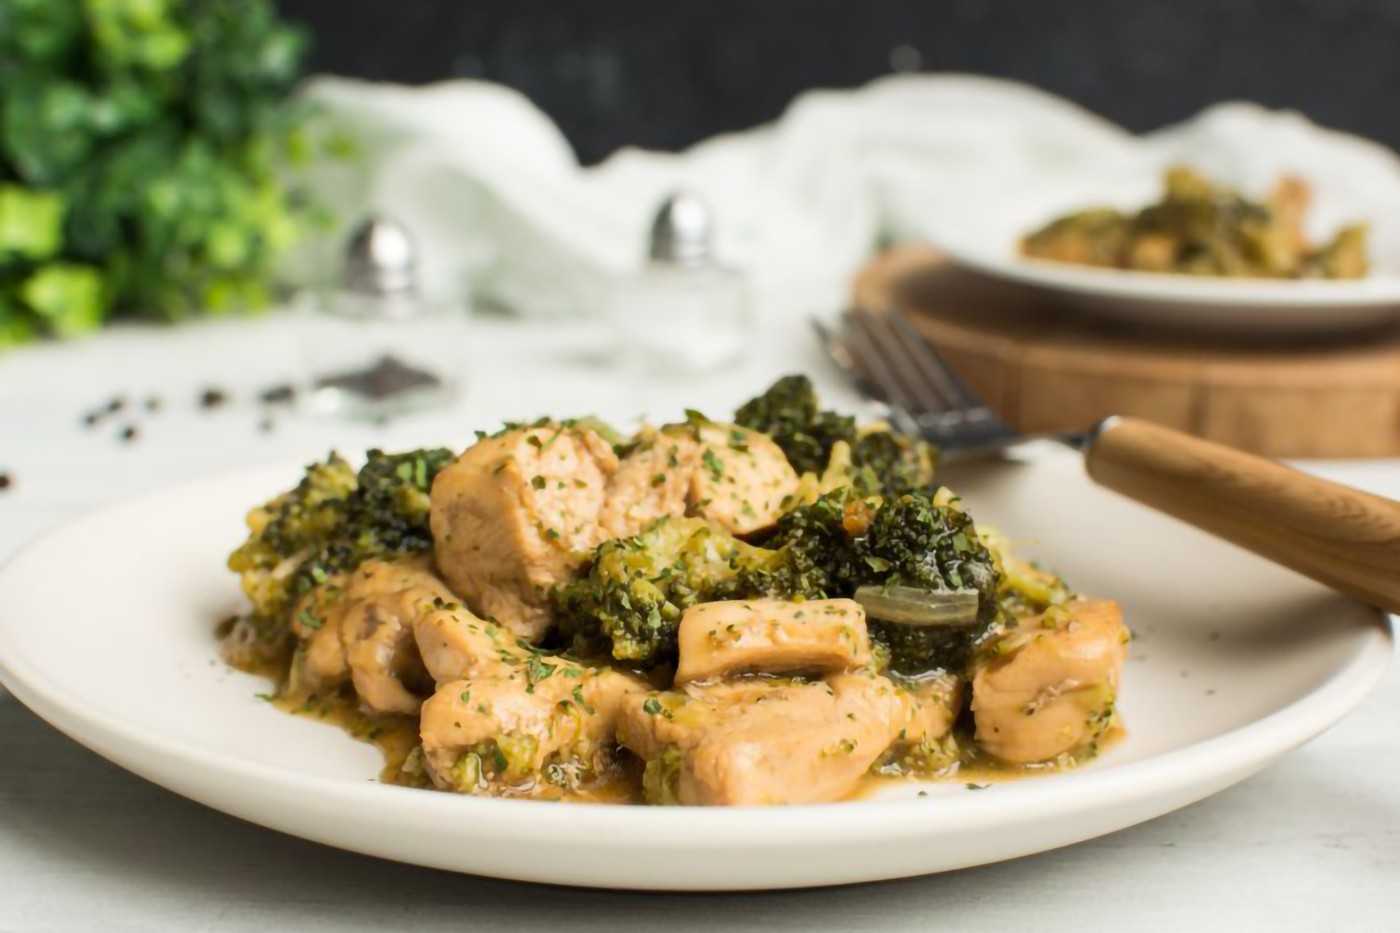 chicken cubes with broccoli florets in a white plate